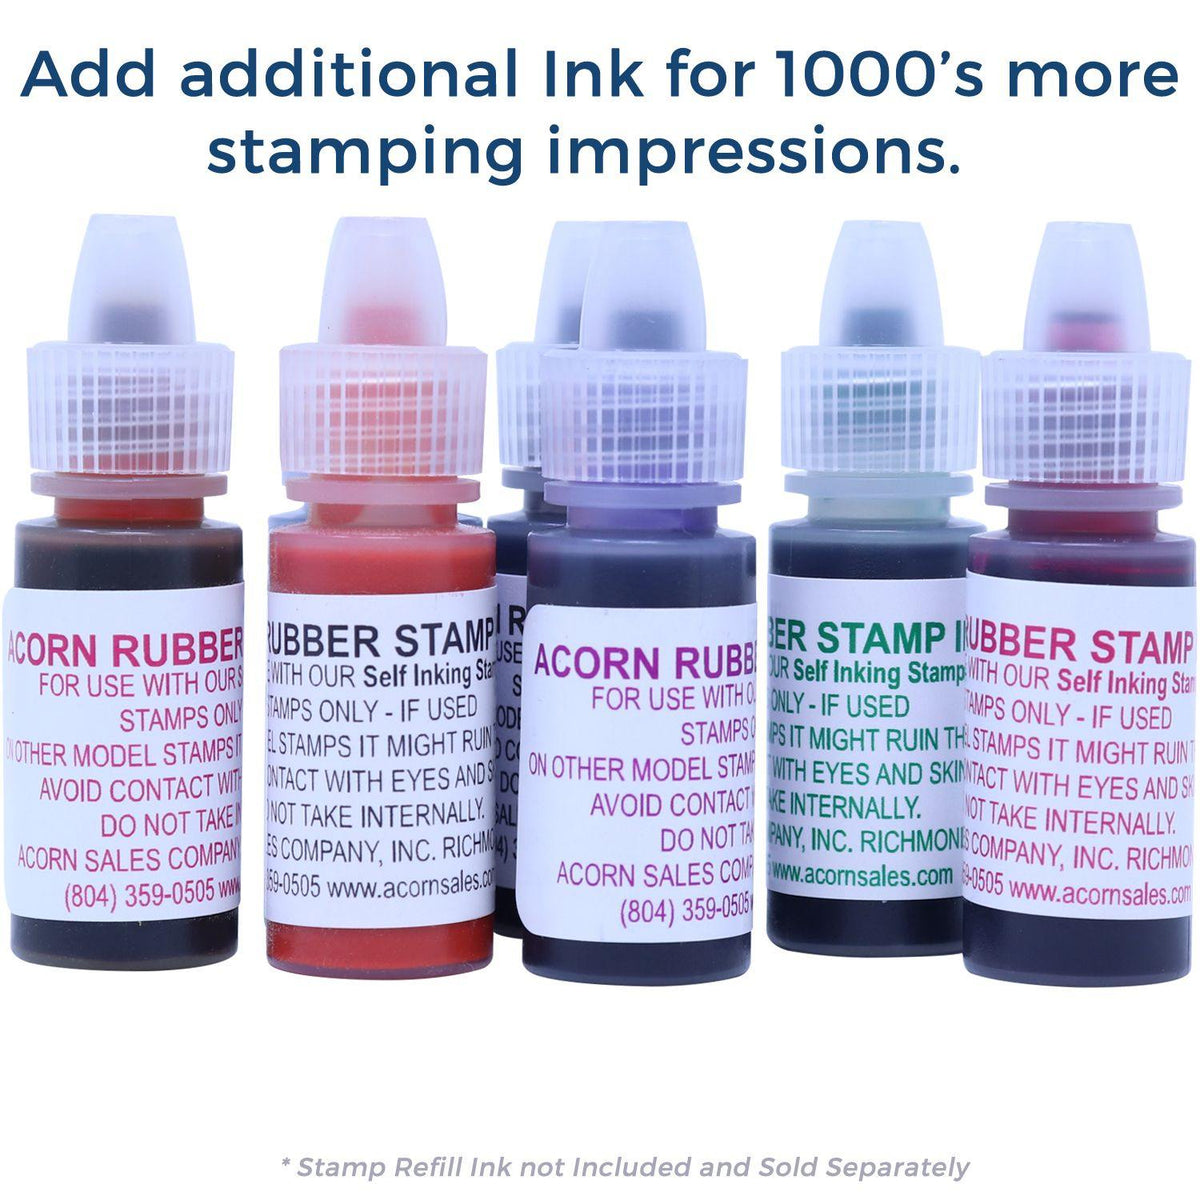 Refill Inks for Large Pre-Inked Narrow Font Approved for Payment Stamp Available